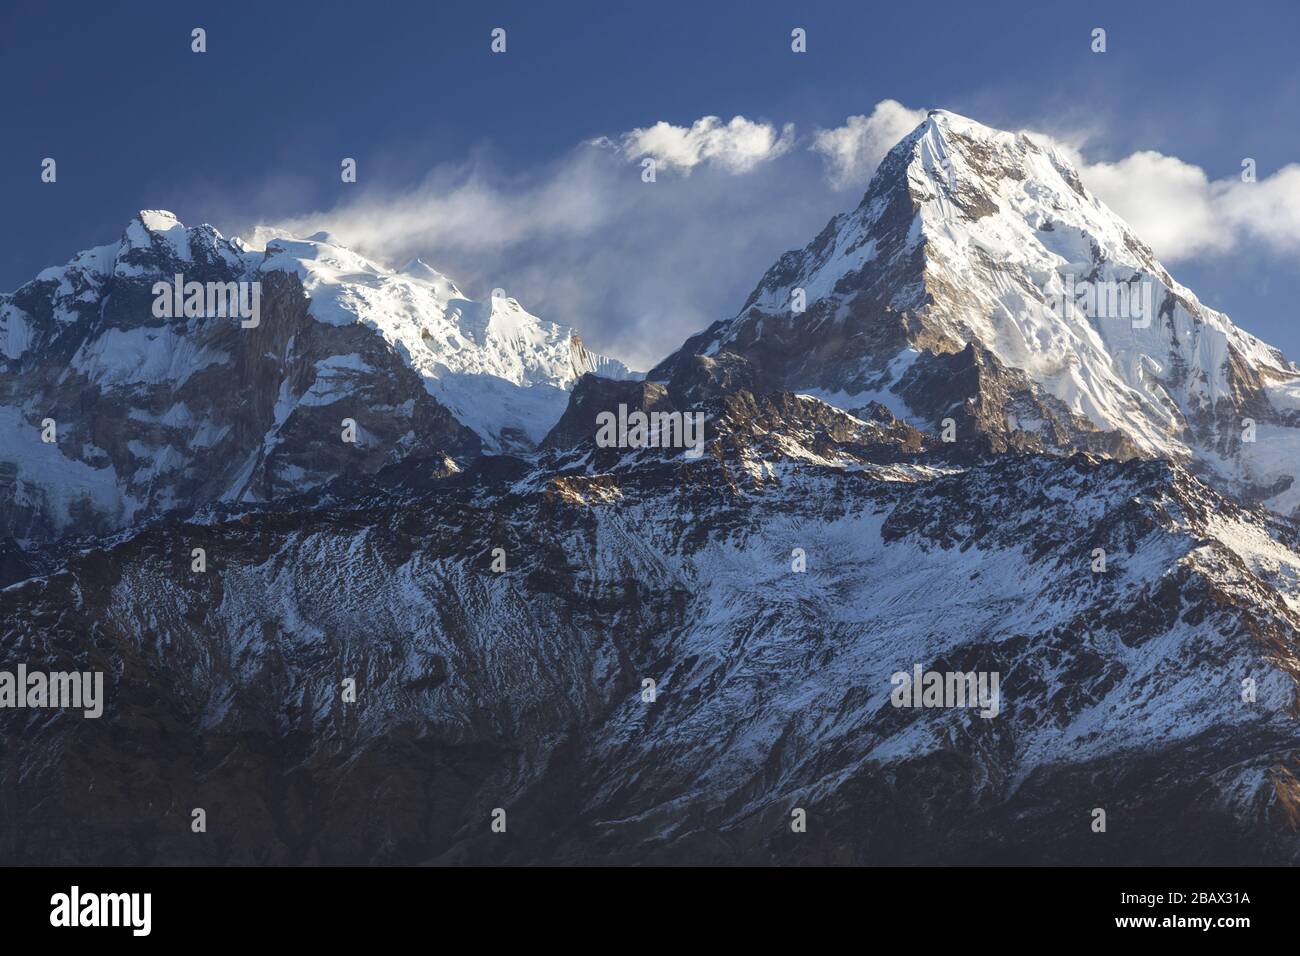 Scenic Early Morning Landscape View of Snowy Annapurna Mountain Peak Range from Poon Hill in Nepal Himalaya Mountains Stock Photo